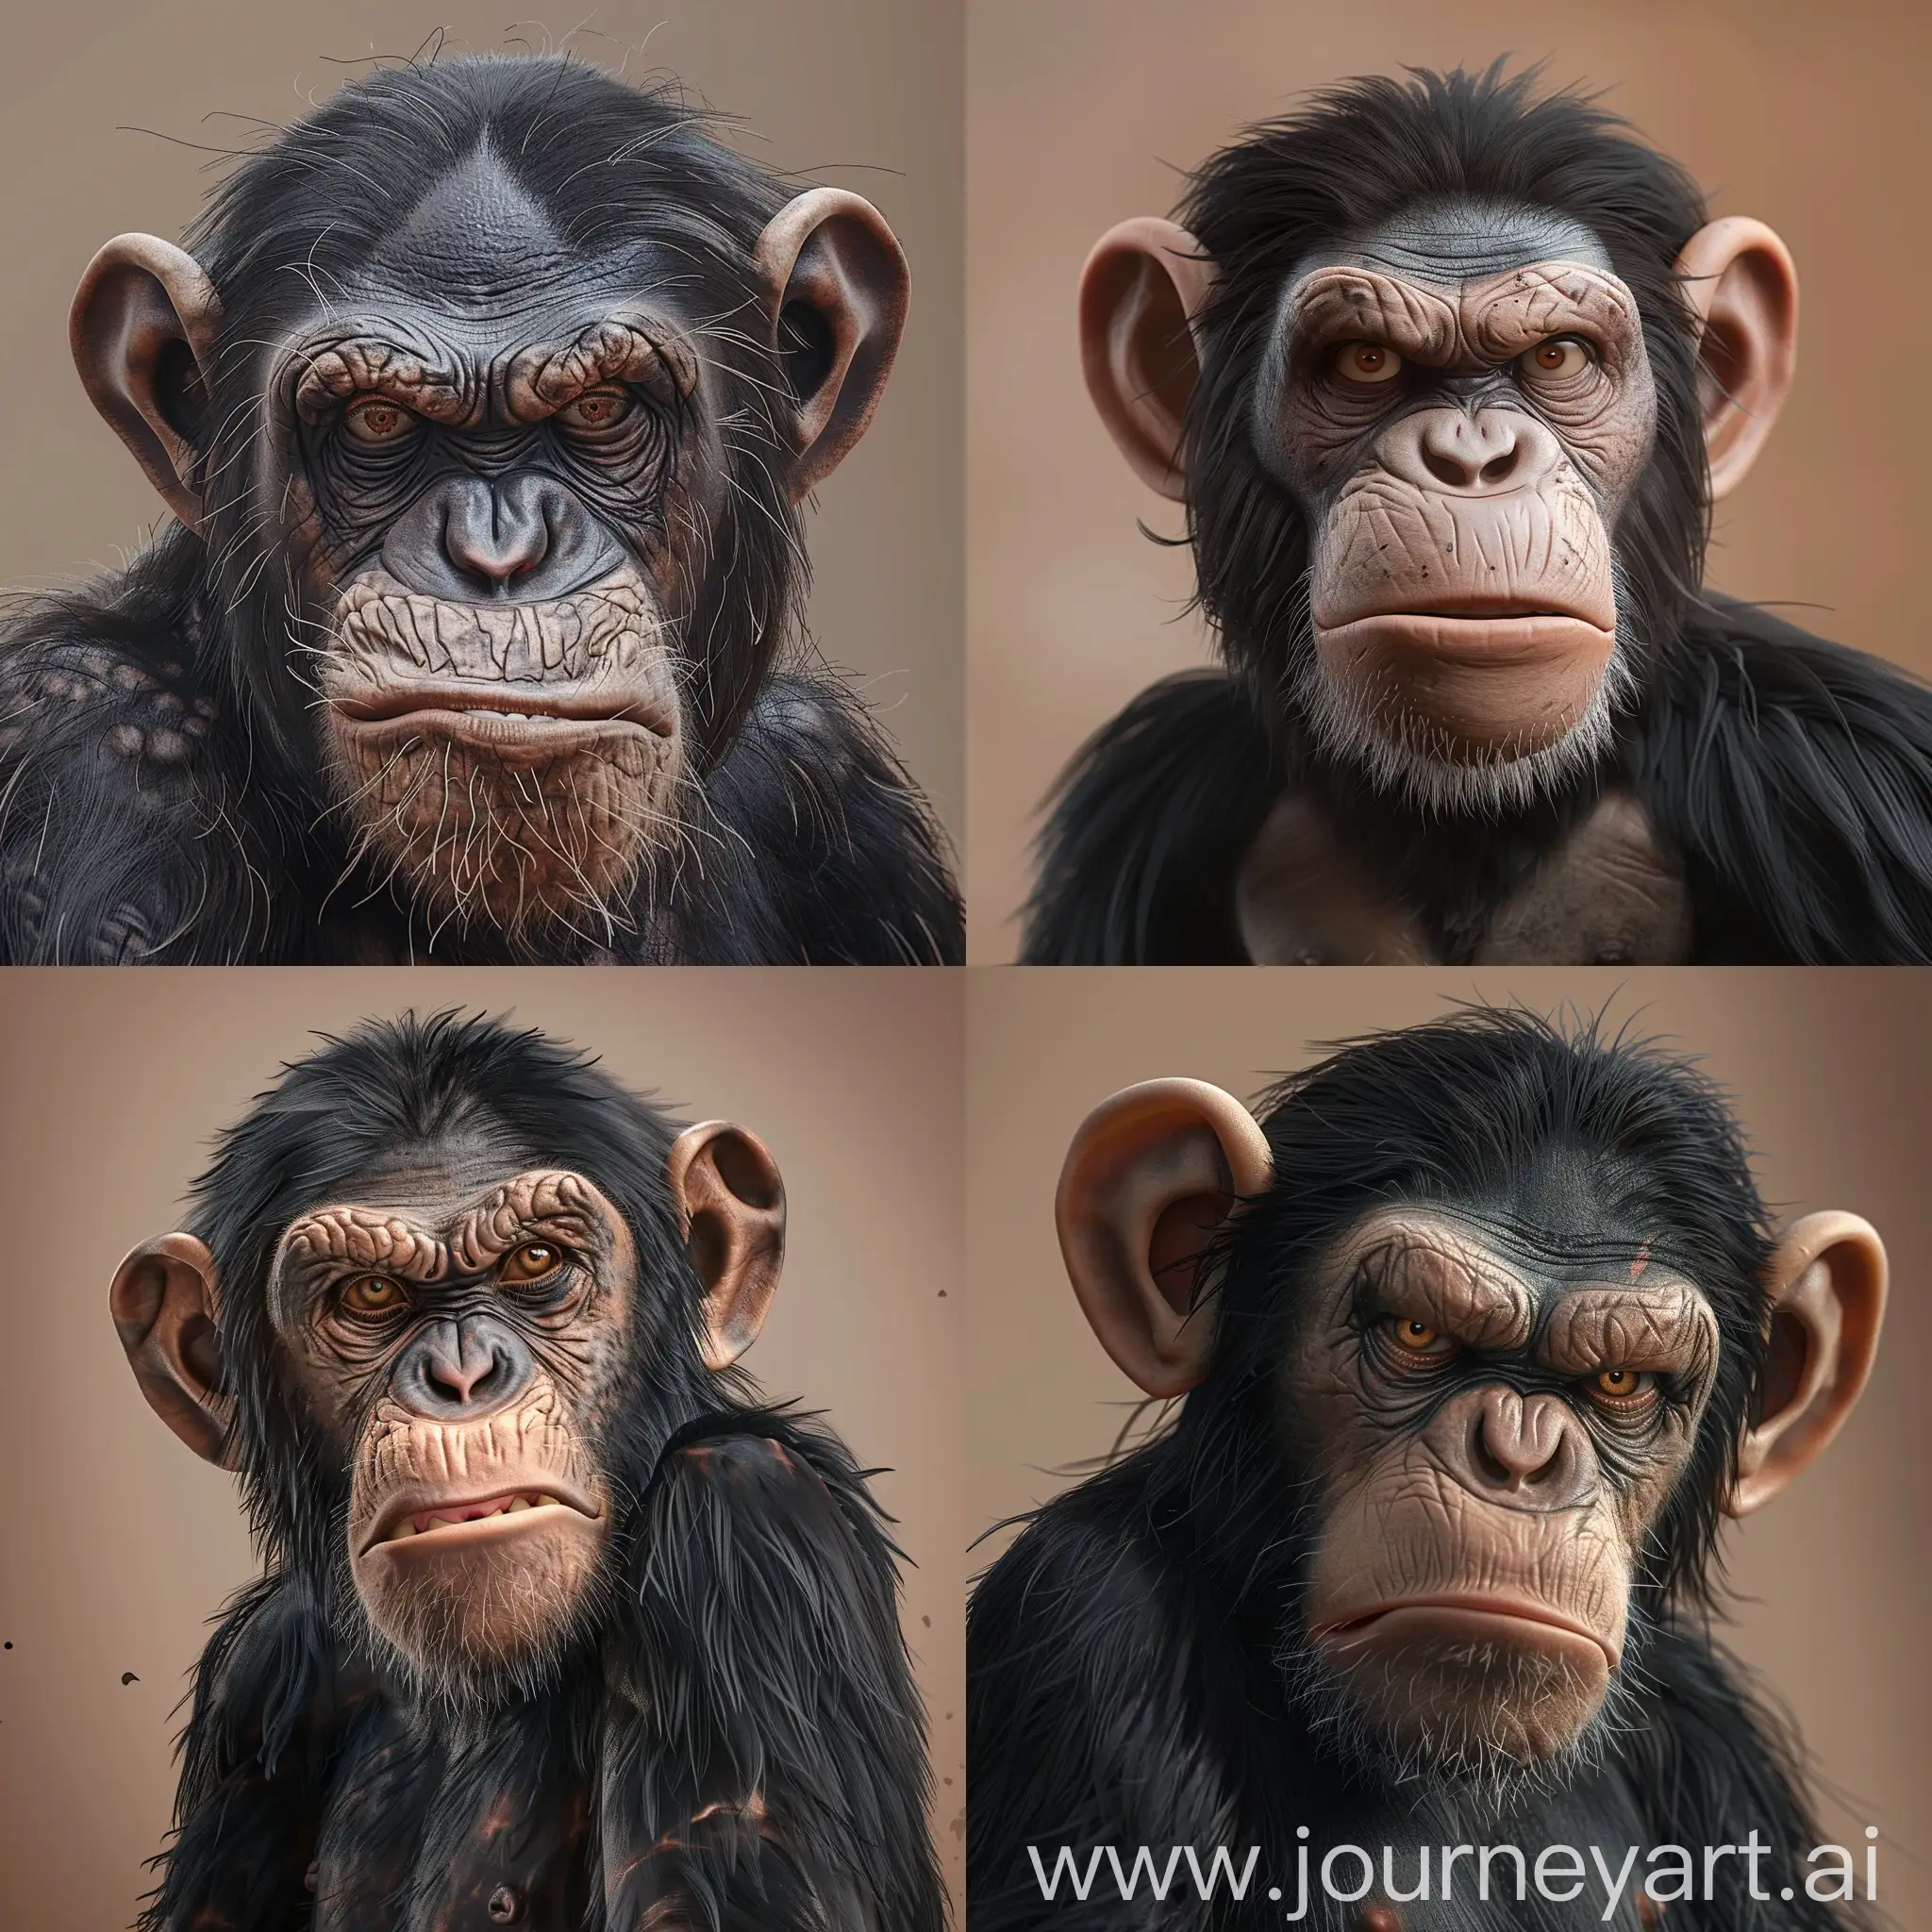 Realistic 3D drawing type image where a chimpanzee monkey is seen, the expression of its angry face, in the image stands the mouth forward with gesture twisted to one side, with long and pointed black hair and disheveled on the head of the head, the eyebrows are prominent, the ears are very large,  , with large brown eyes the background of the image which is a light brown color ...